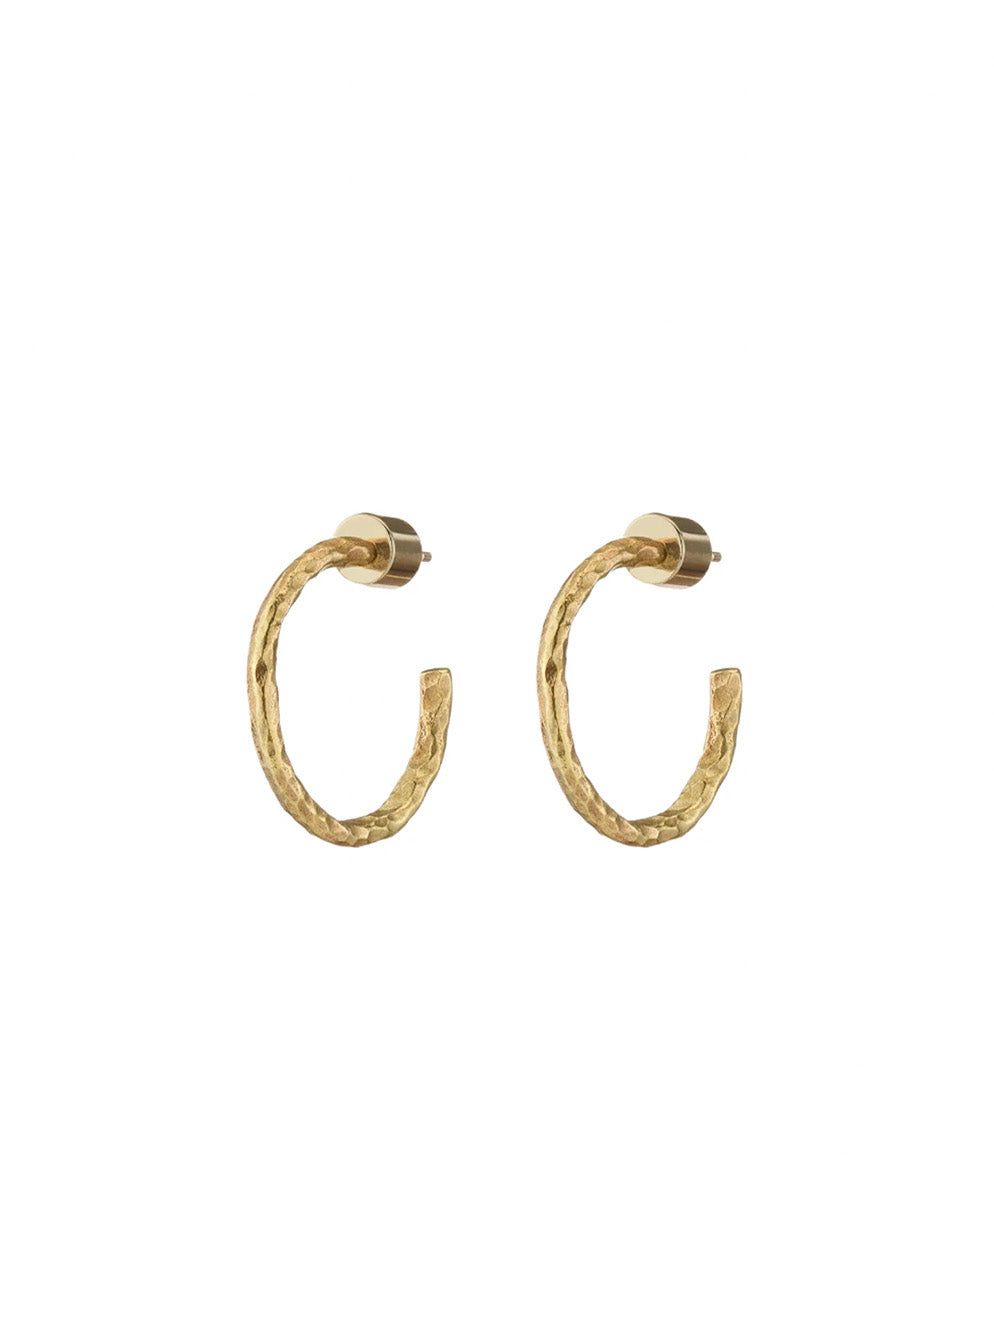 Sarah Huggie Hoops in 10K Yellow Gold Plated Brass